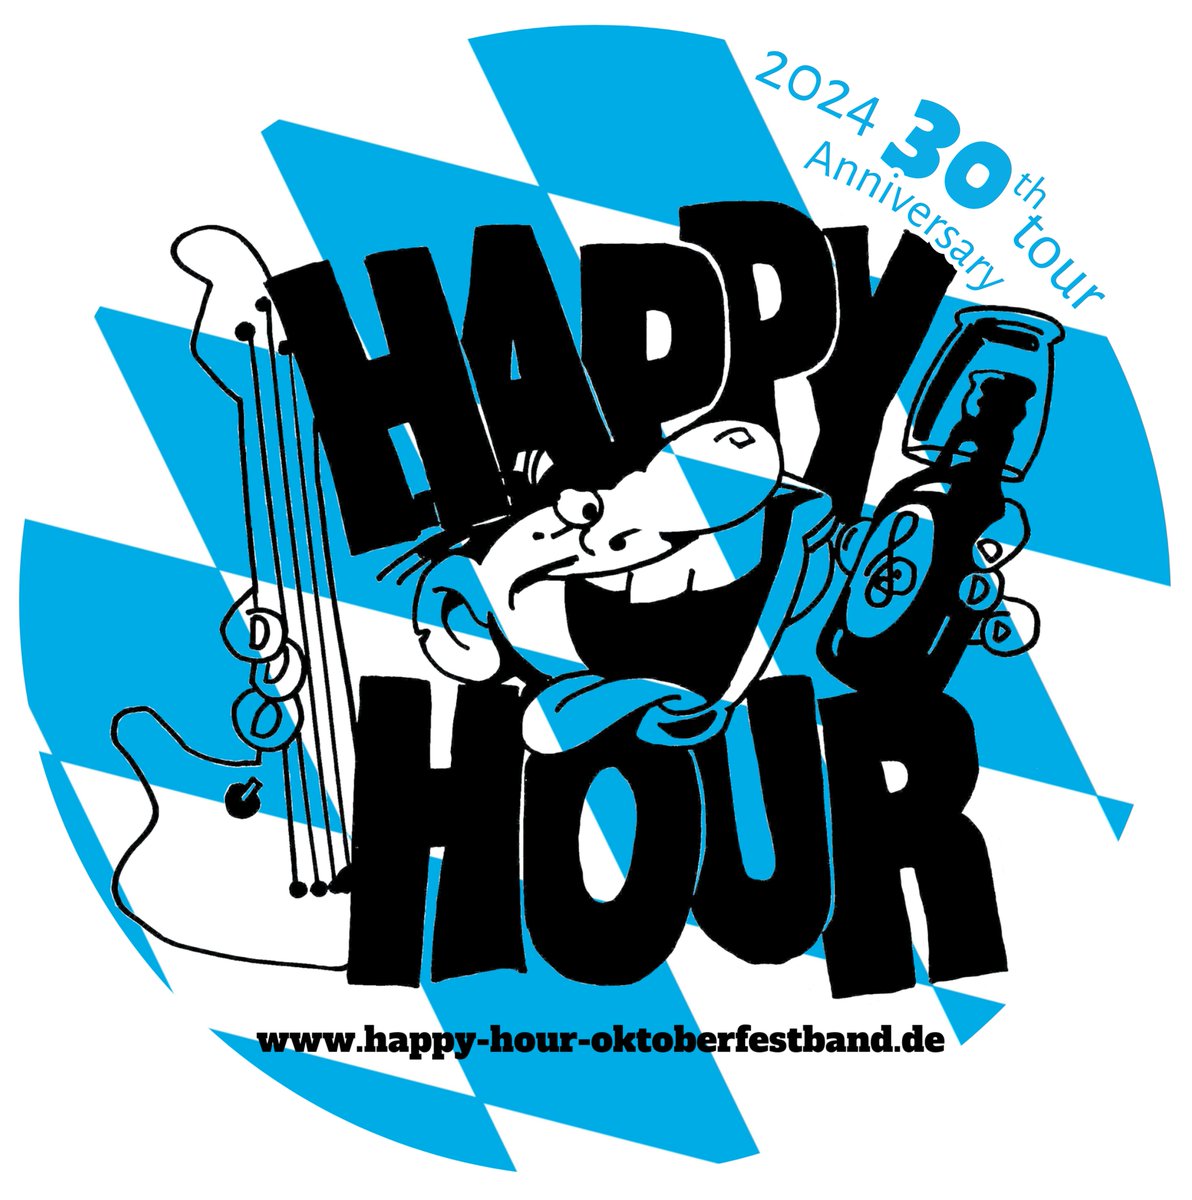 HAPPY HOUR OKTOBERFESTBAND 30th Anniversary Oktoberfest tour 2024 happy-hour-oktoberfestband.de BOOKINGS OPEN NOW for 2024 ‼️ booking@happy-hour-oktoberfestband.de Celebrate Oktoberfest in the most authentic style with the HAPPY HOUR OKTOBERFESTBAND straight from the heart of Bavaria